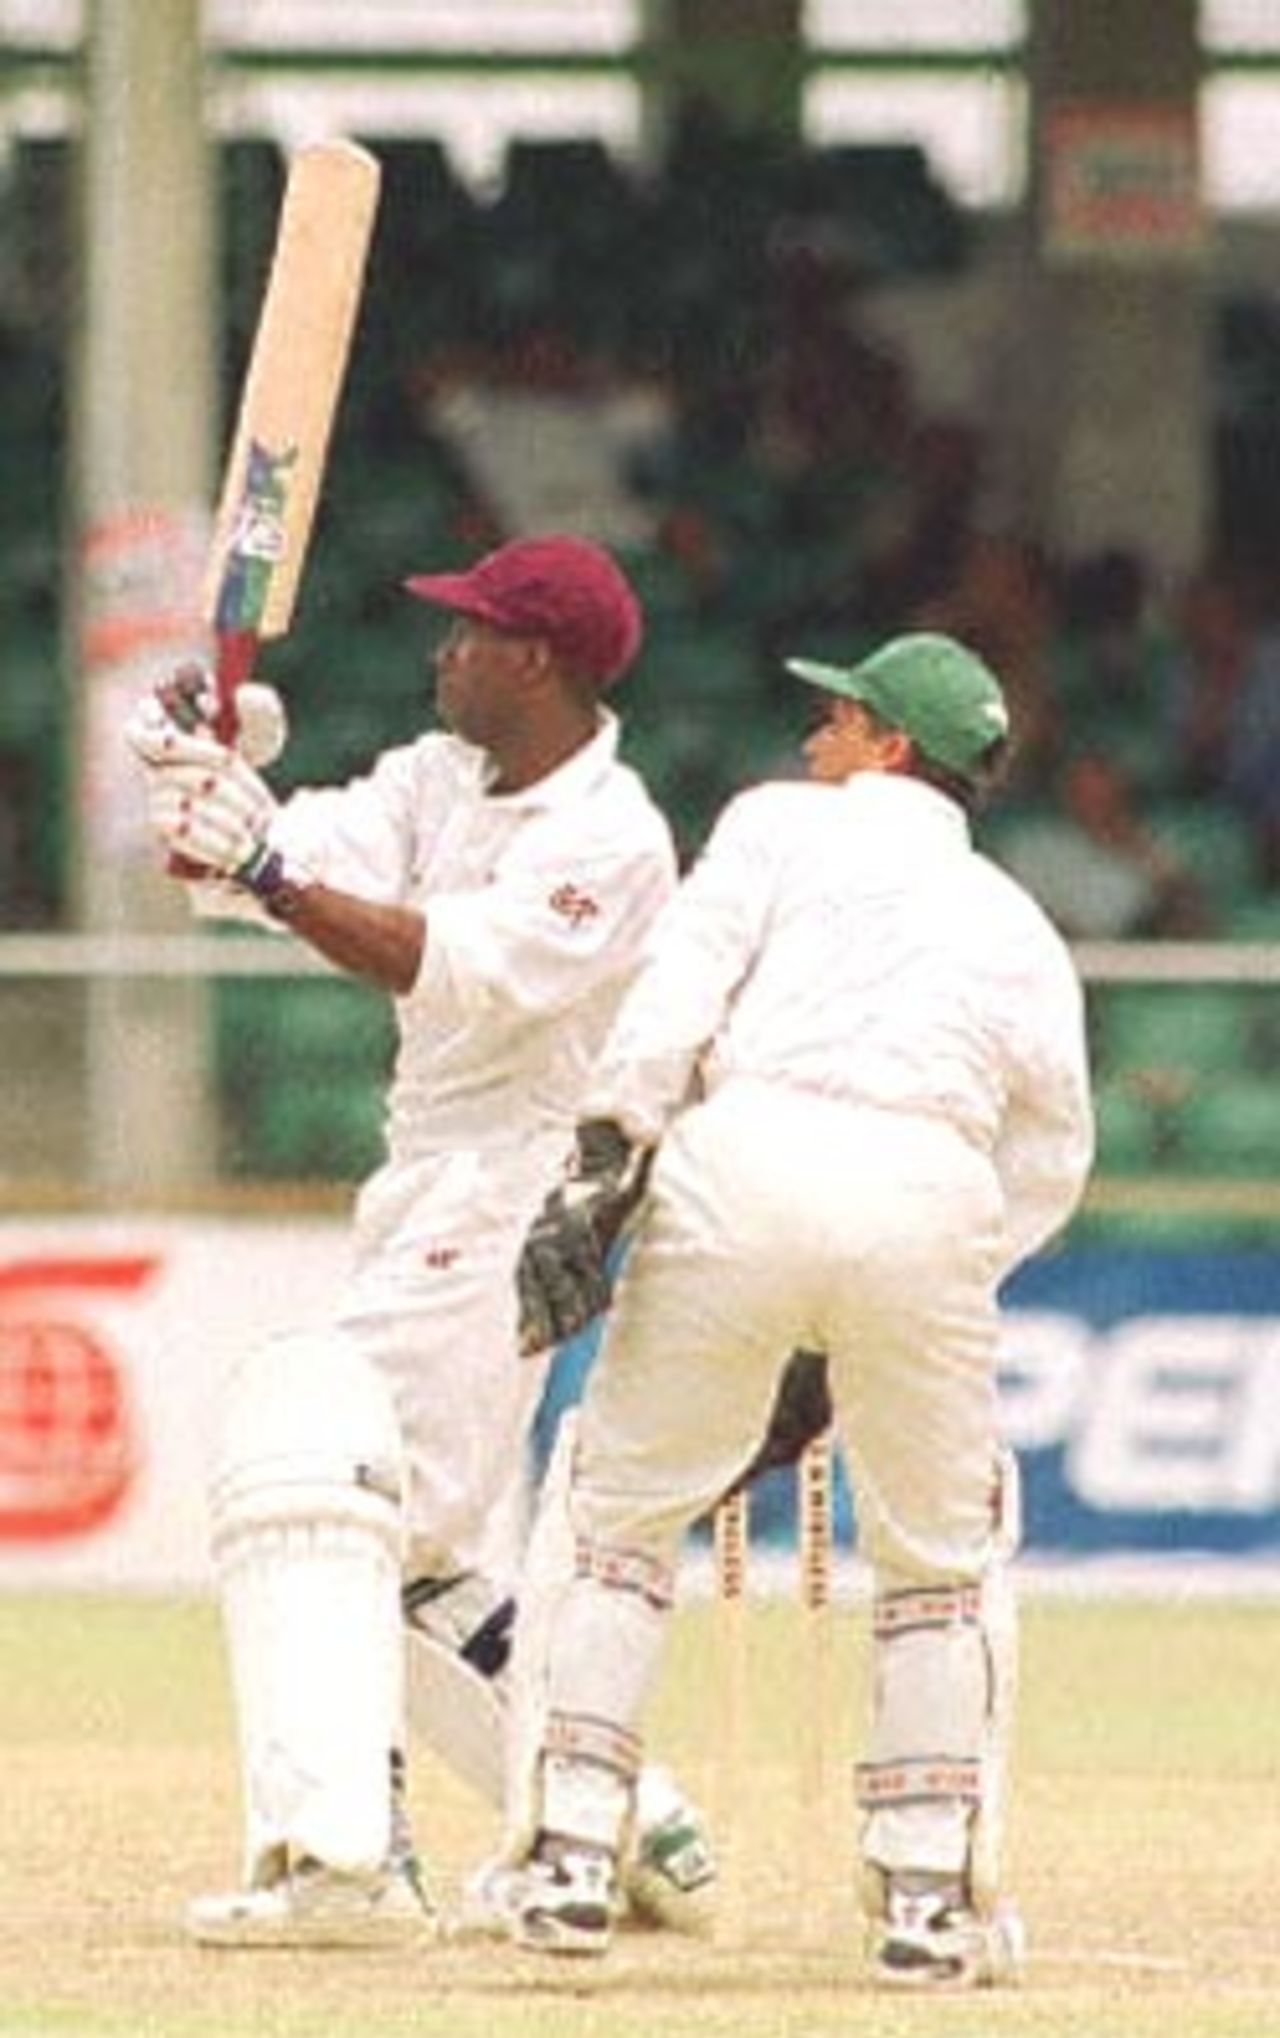 West Indies opening batsman Sherwin Campbell (L) pulls Pakistani bowler Saqlain Mushtaq for 06 on the second Cable & Wireless Test Pakistan in West Indies, West Indies v Pakistan  Kensington Oval, Bridgetown, Barbados (18-22 May 2000) Day 2